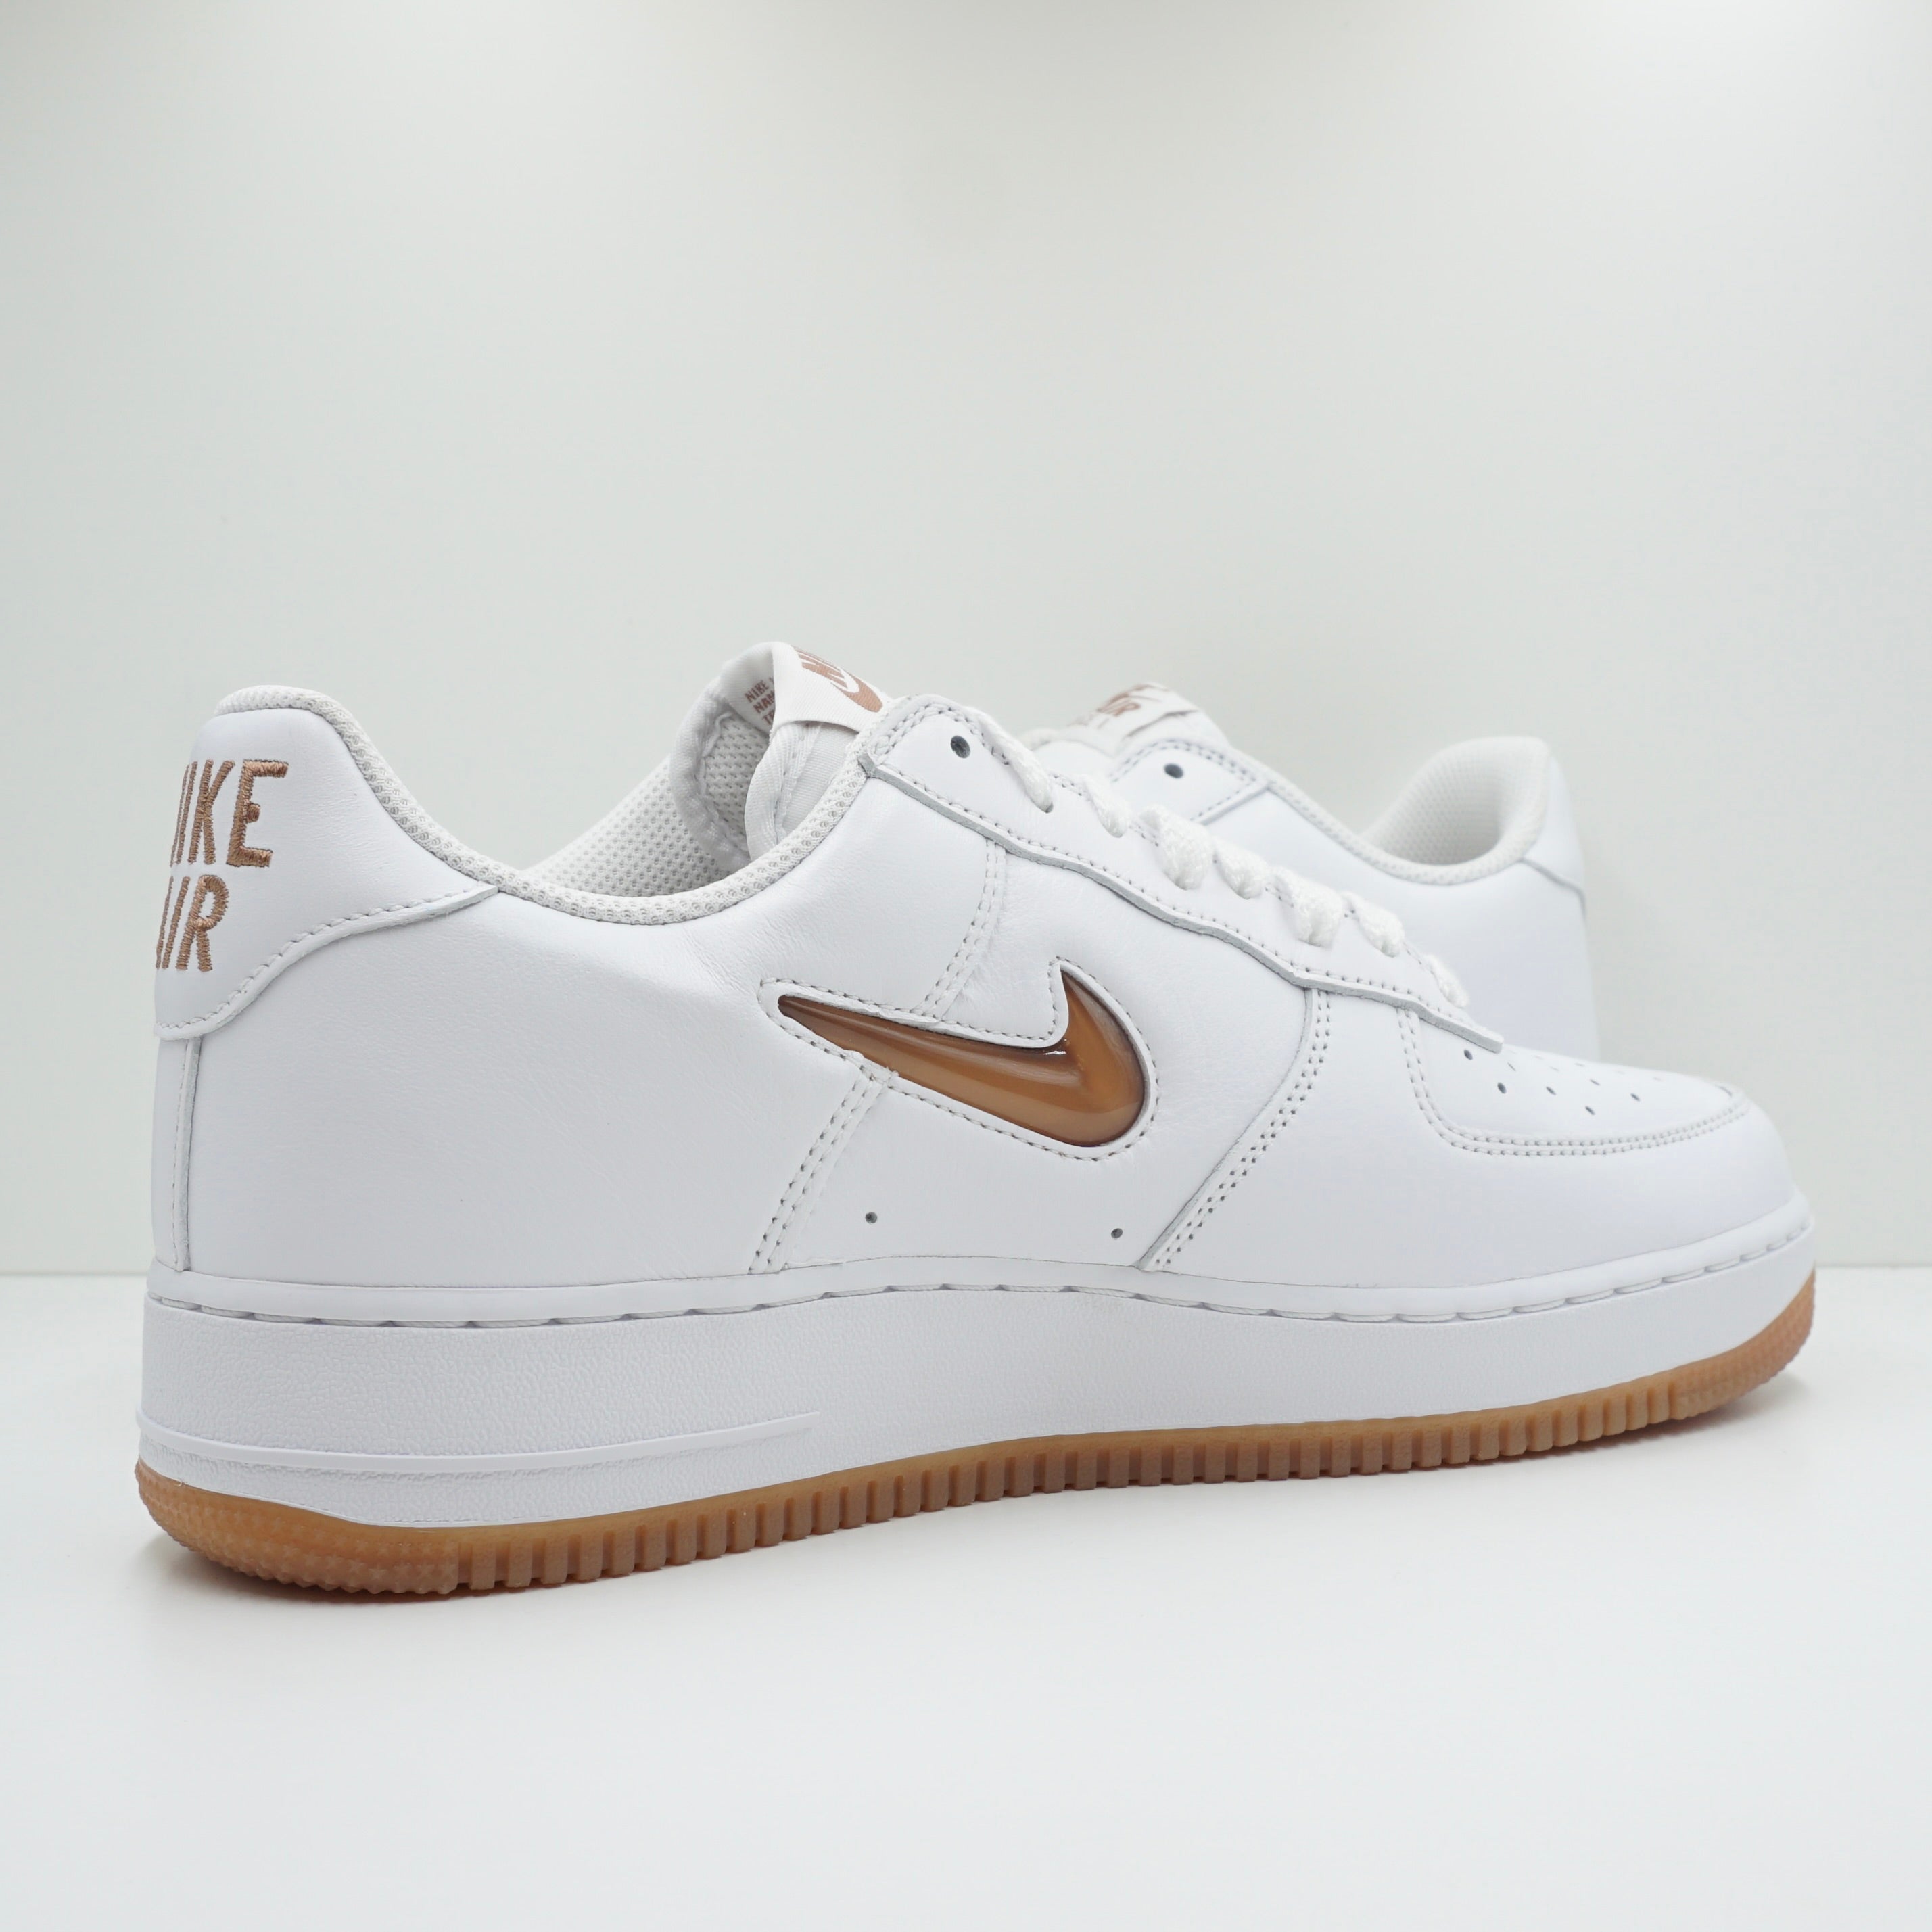 Nike Air Force 1 '07 Low Retro Color of the Month Jewel Bronze Gum